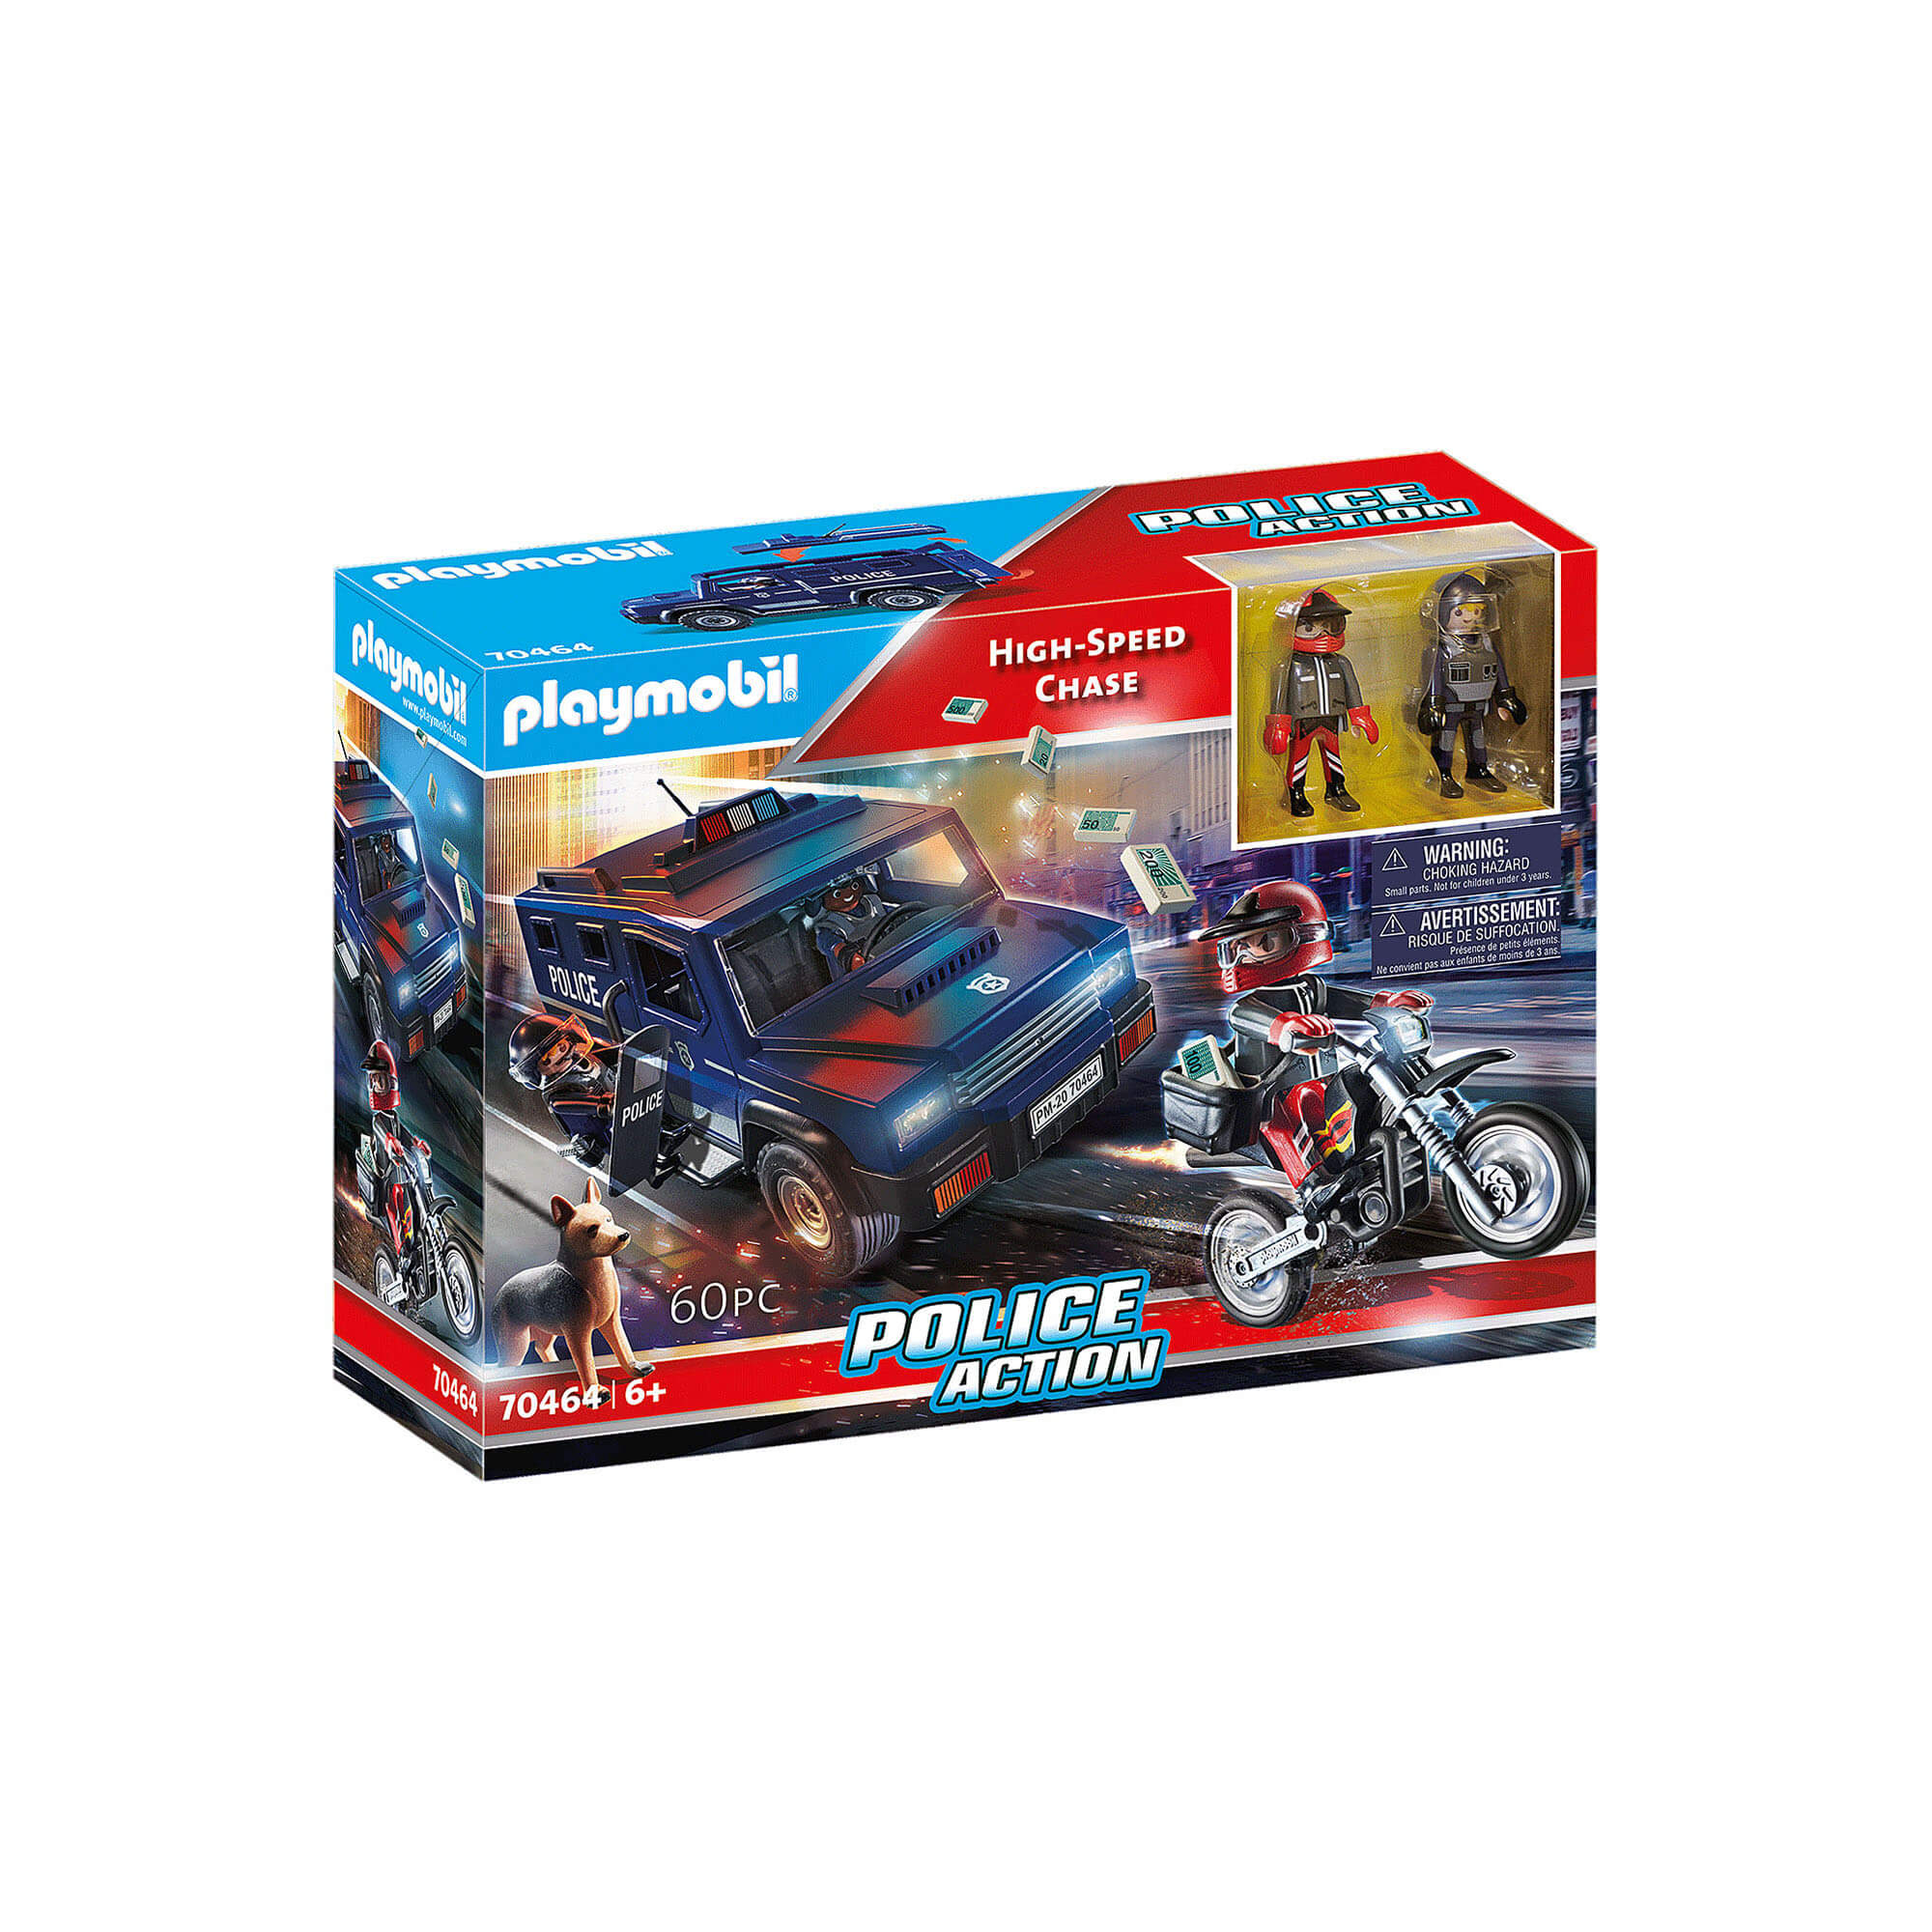 PLAYMOBIL Police Action High-Speed Chase (70464)